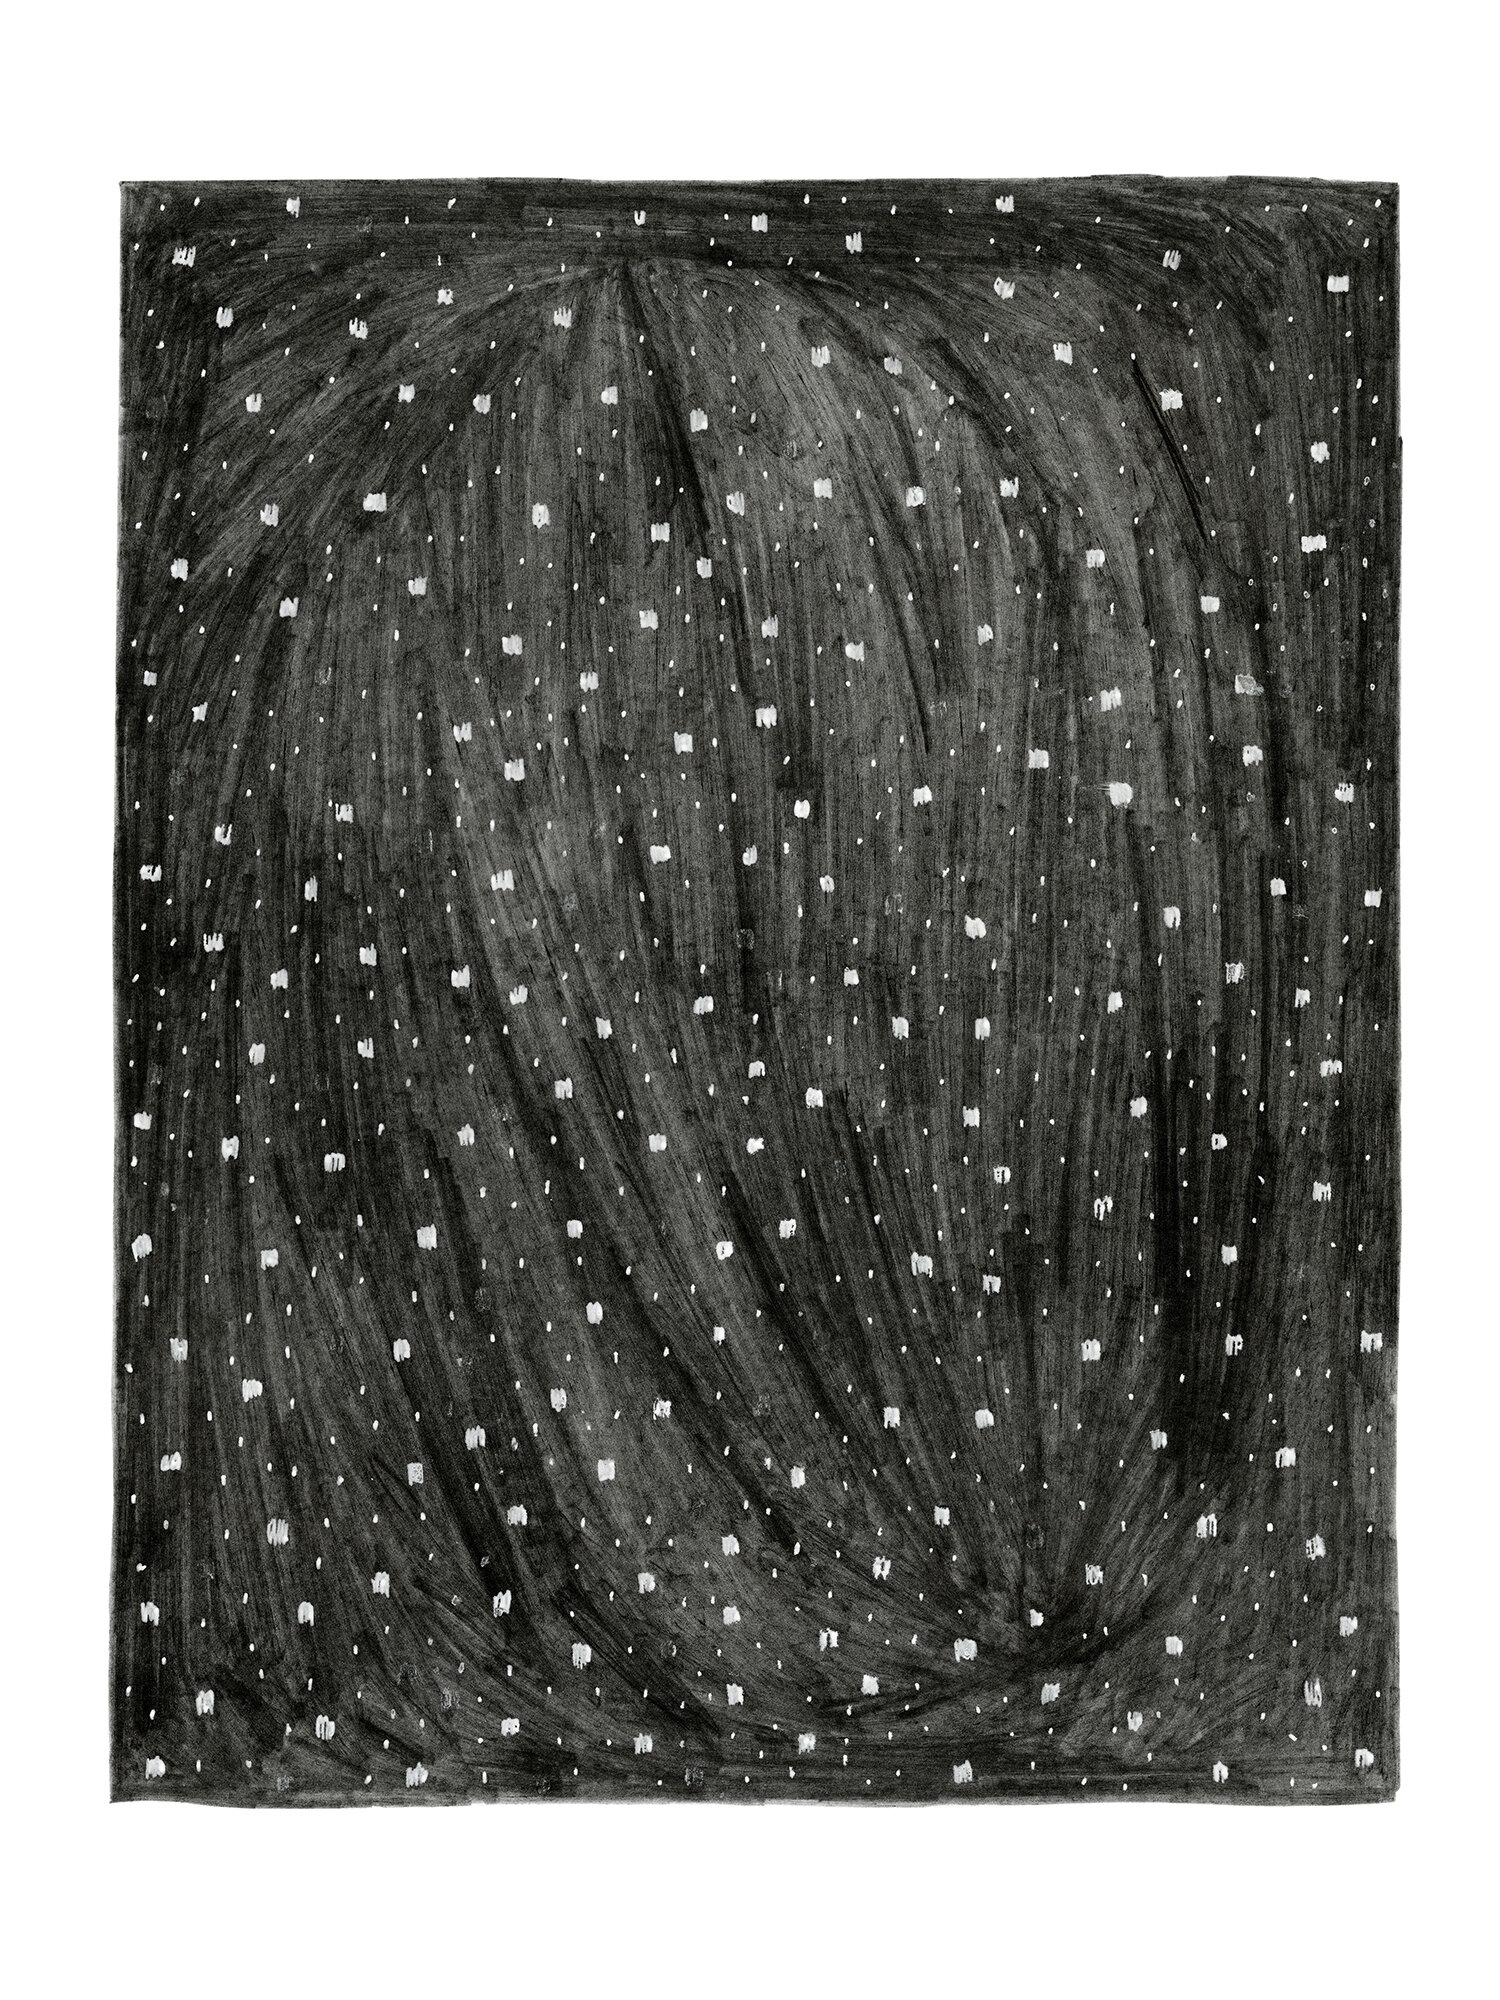   Stars Rug   Pencil on paper 12 x 9 inches    